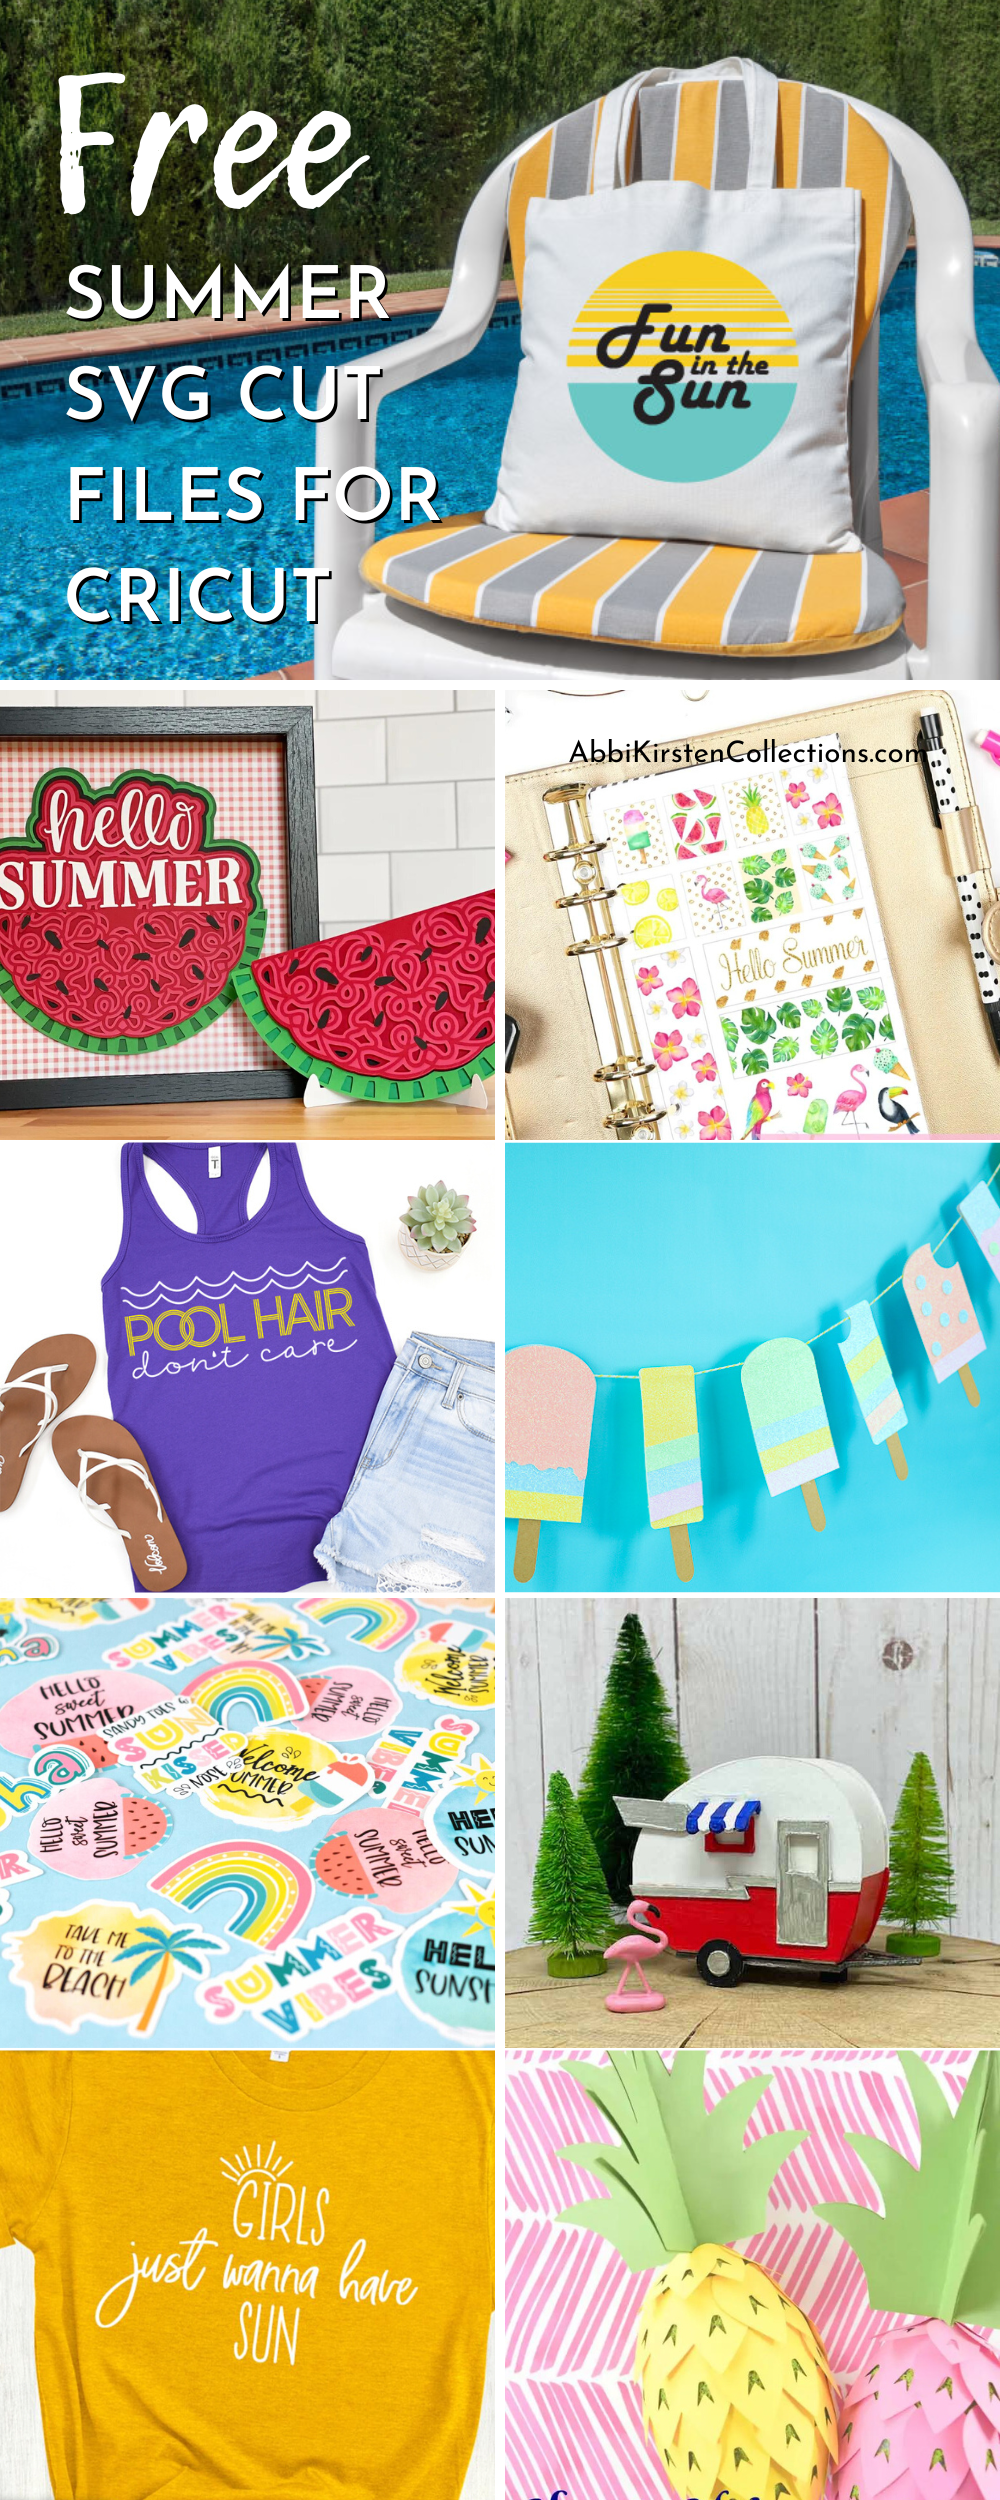 A long Pinterest graphic with nine collaged images free summer SVG files you can download, like paper watermelon wall art, summer quotes, and banners. The top text says, “Free Summer SVG Cut Files for Cricut.”